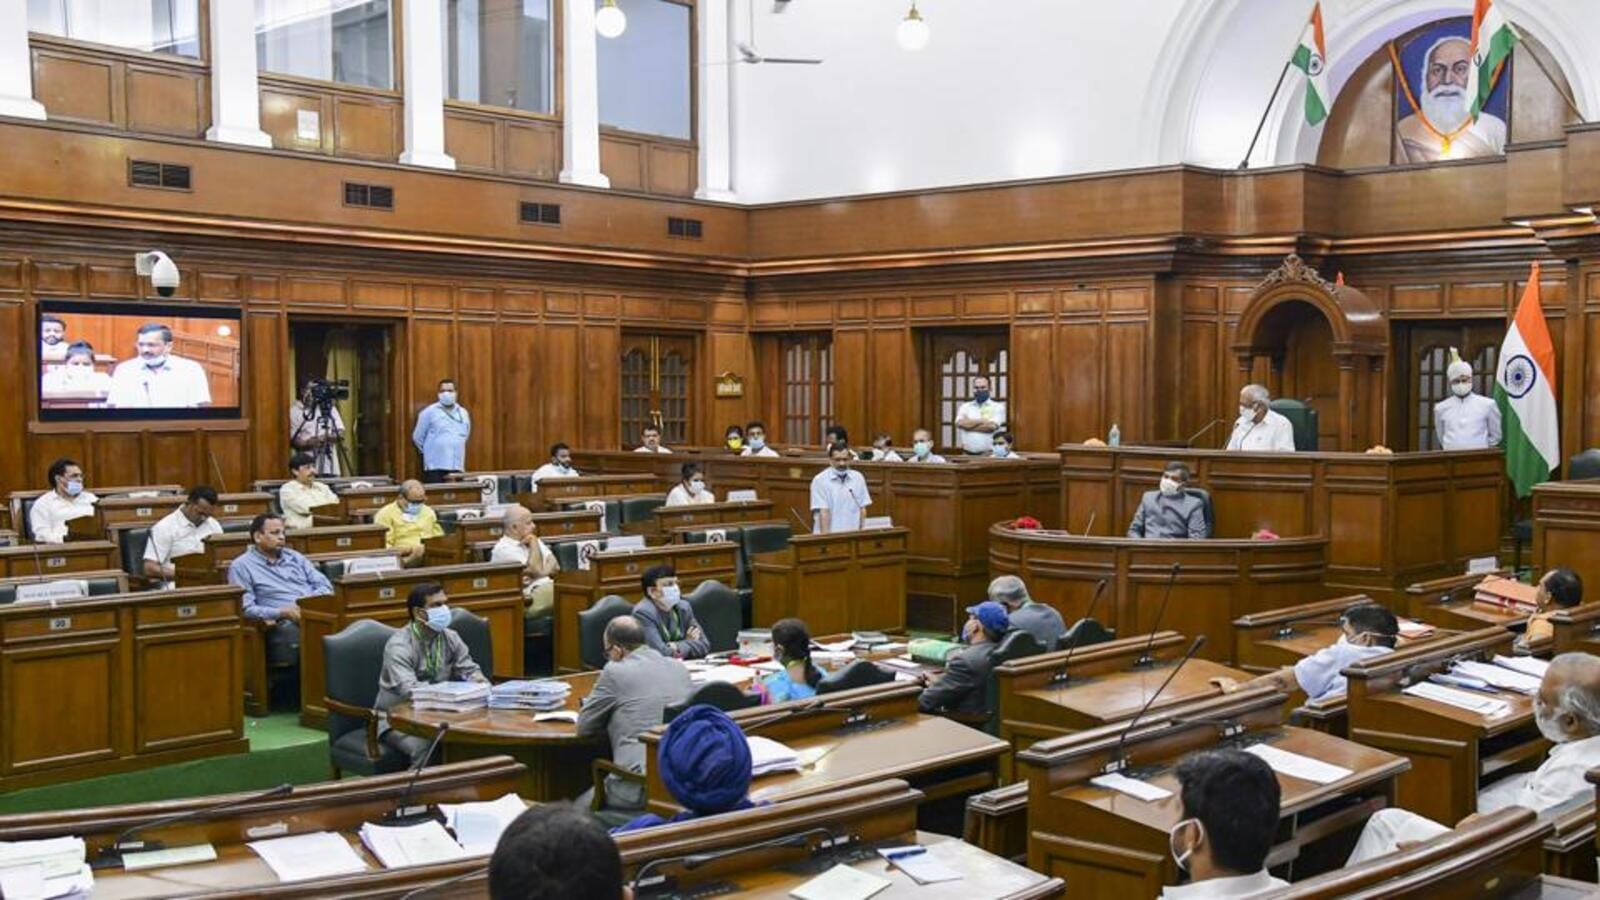 In green push, Delhi assembly likely to go paperless this year | Latest ...